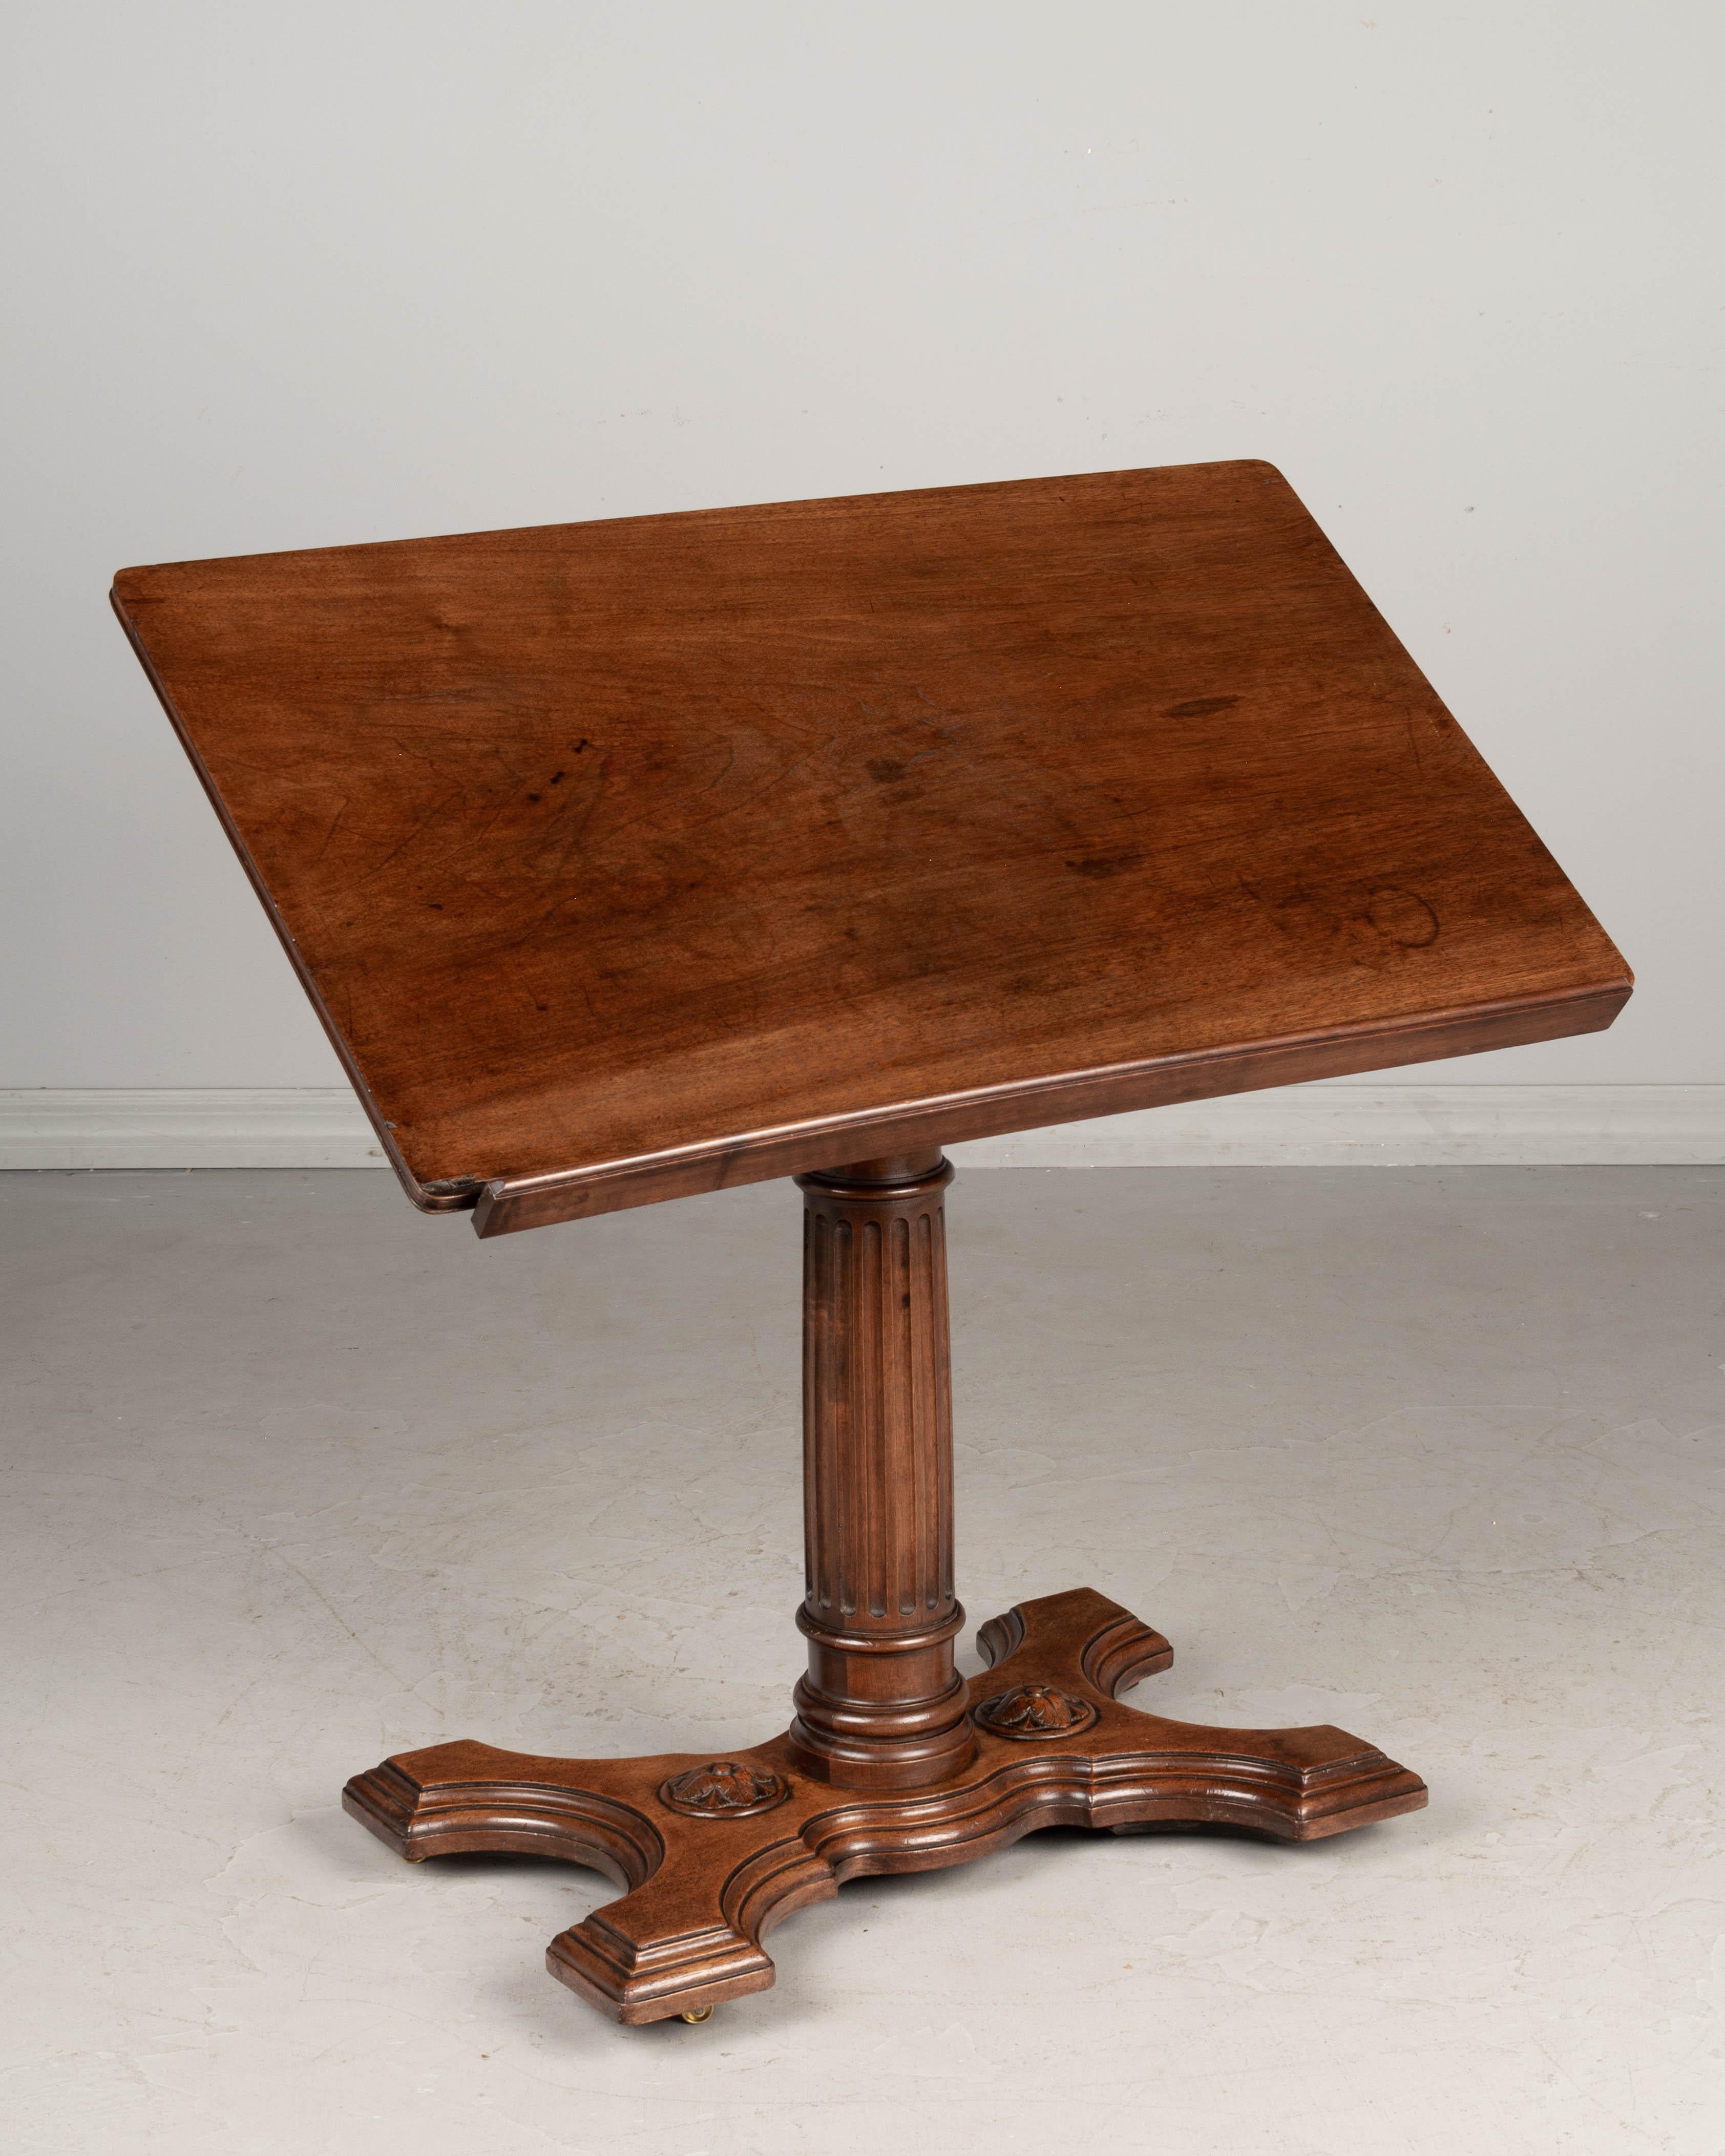 A 19th century French adjustable tilt-top table, or easel, made of solid walnut with a sturdy turned post and cast brass mechanism. Beautiful character and patina with waxed finish. Tabletop may be tilted flat or angled and has a small latched ledge